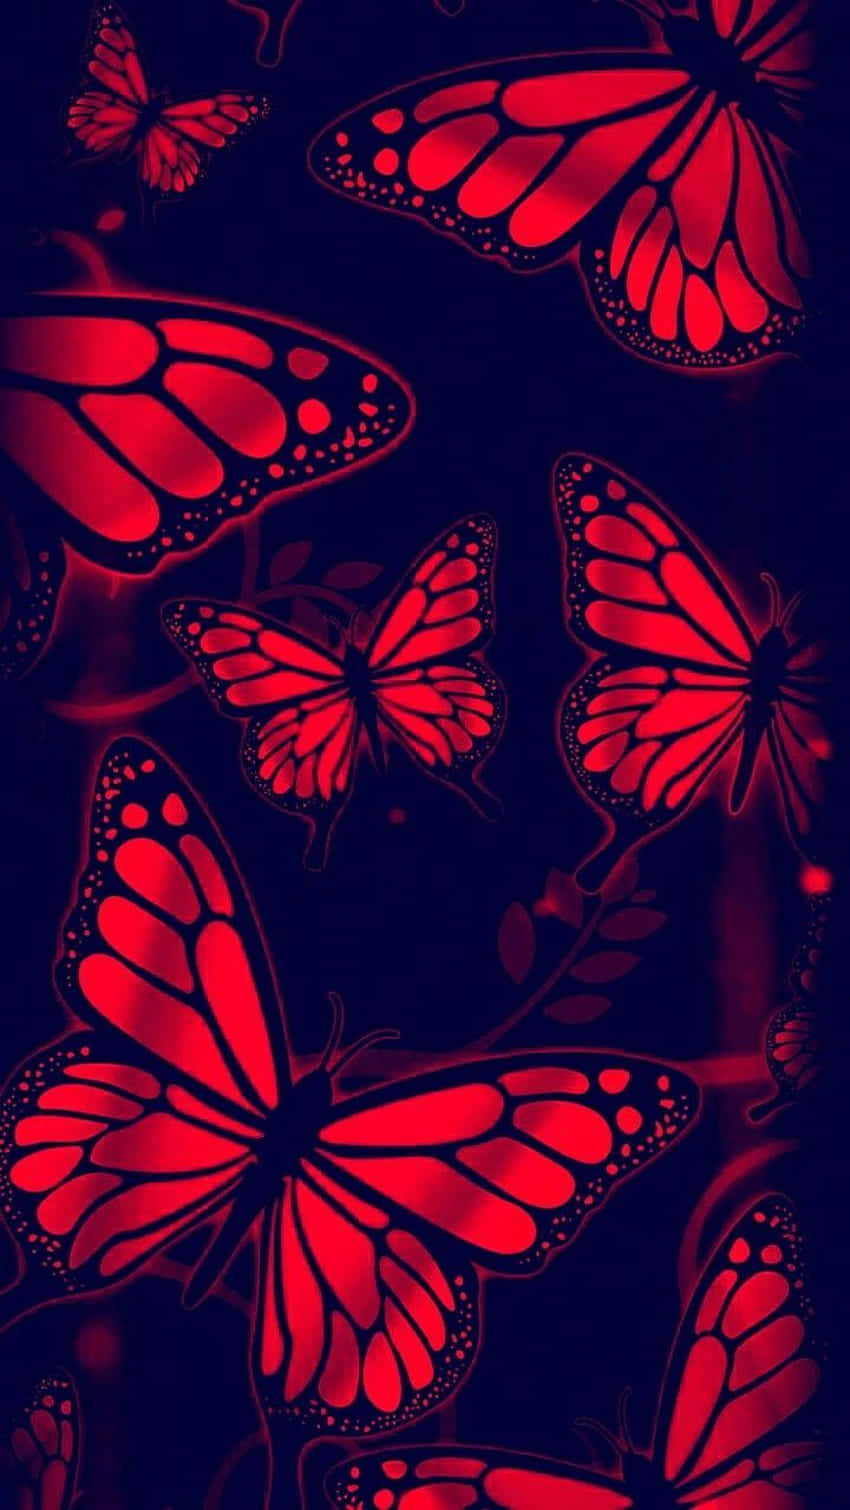 A beautiful Red Butterfly perched on a flower Wallpaper